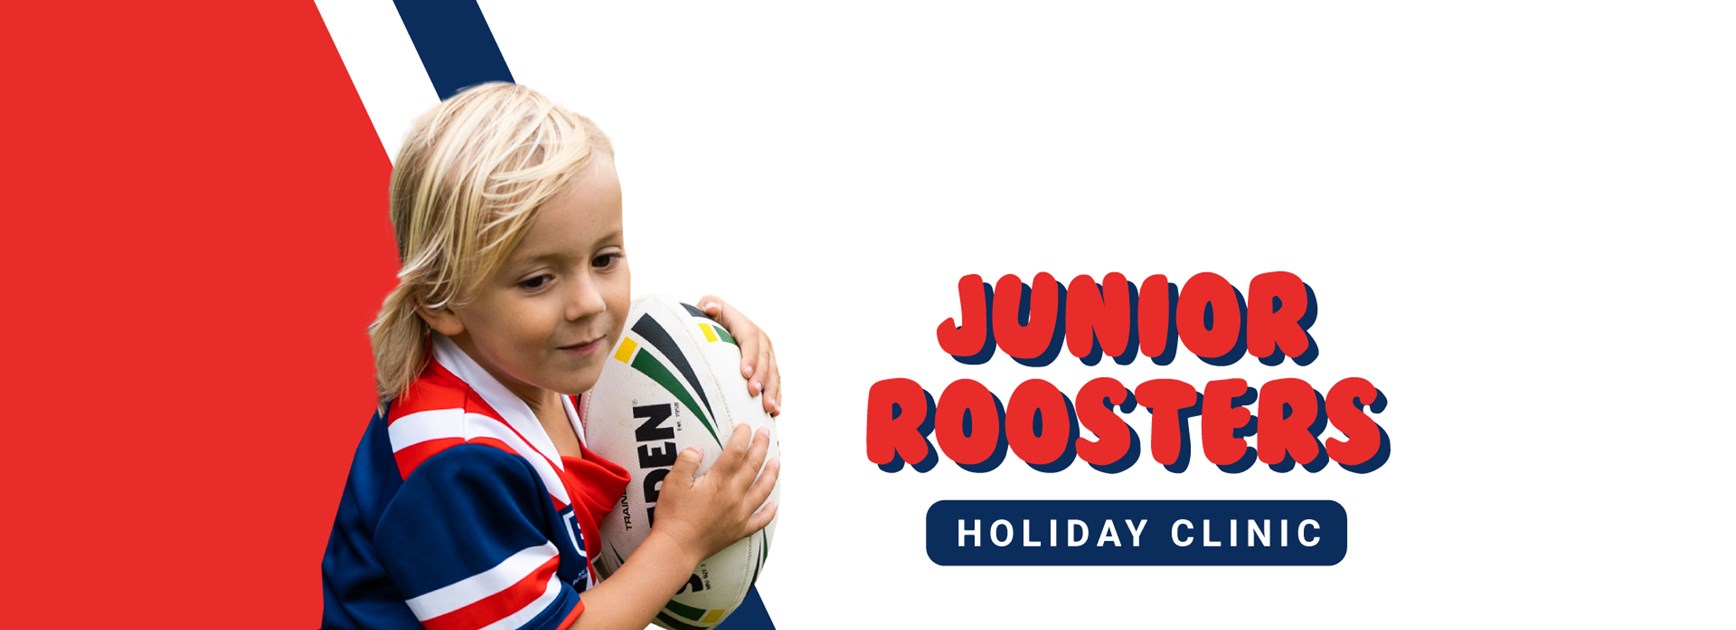 Sign Up for the Junior Roosters Holiday Clinic this July!